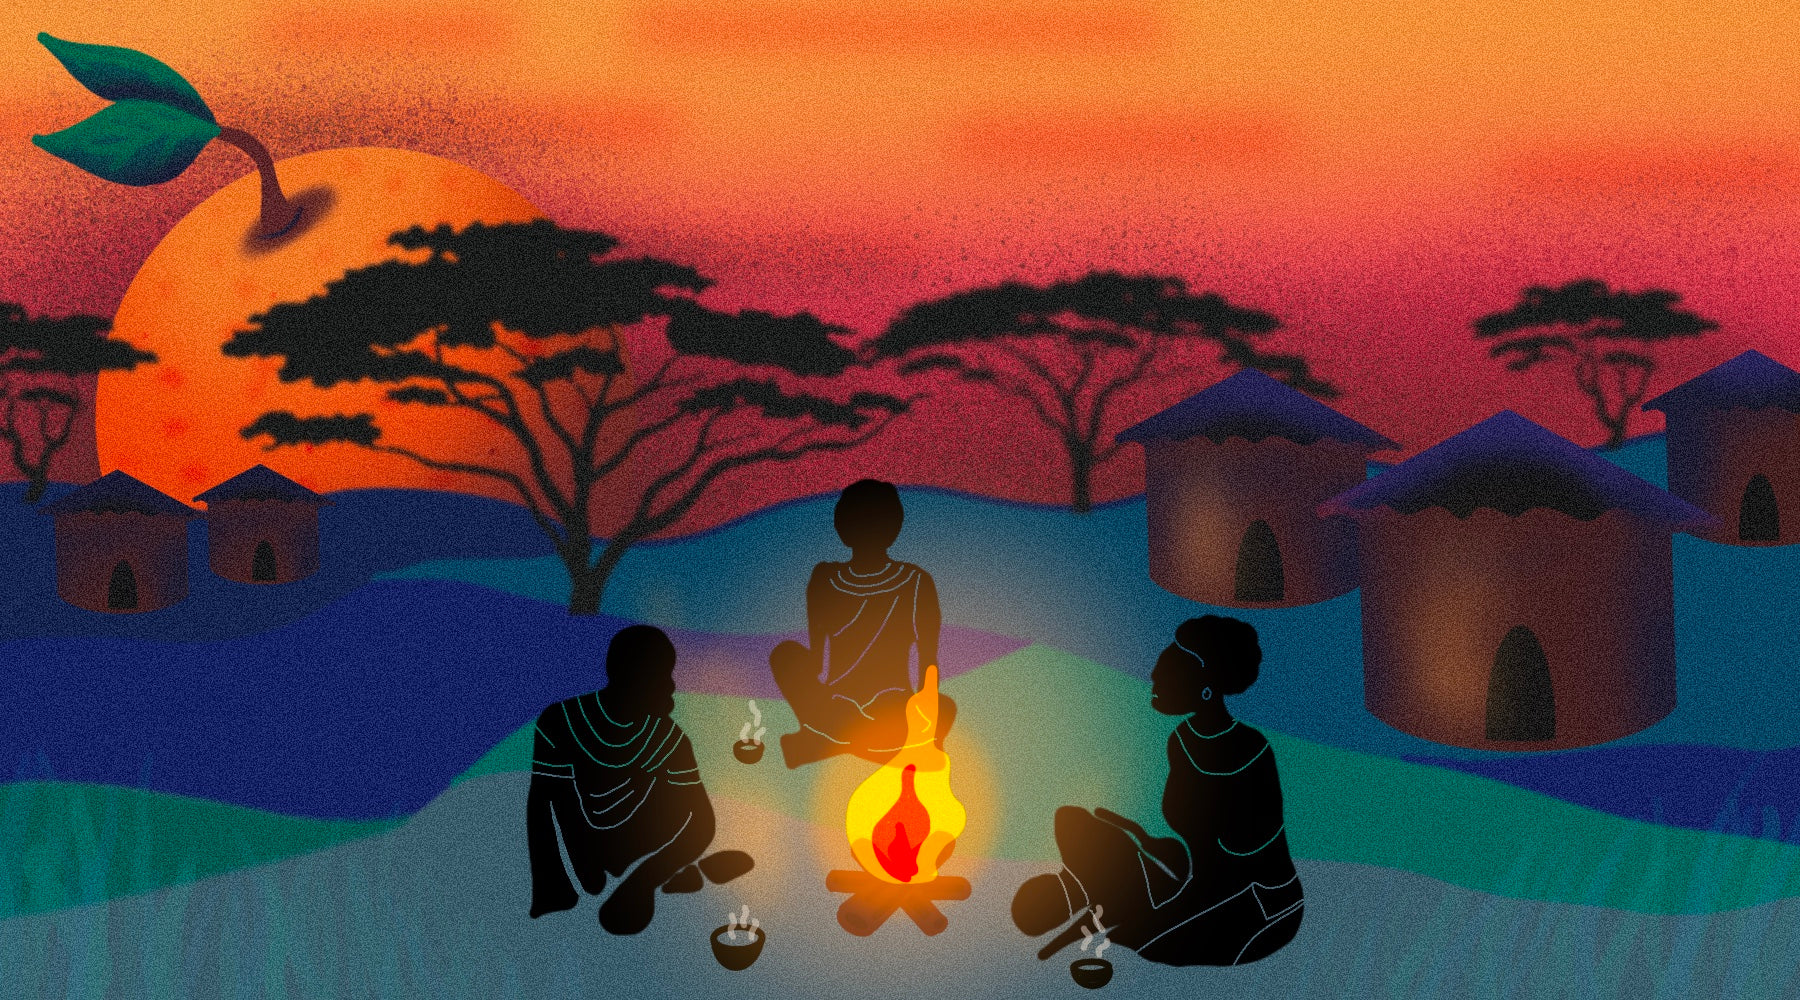 African tribal villagers sitting around a fire near a small kenyan village. Savannah with orange sun on the horizon. Conceptual art drawing